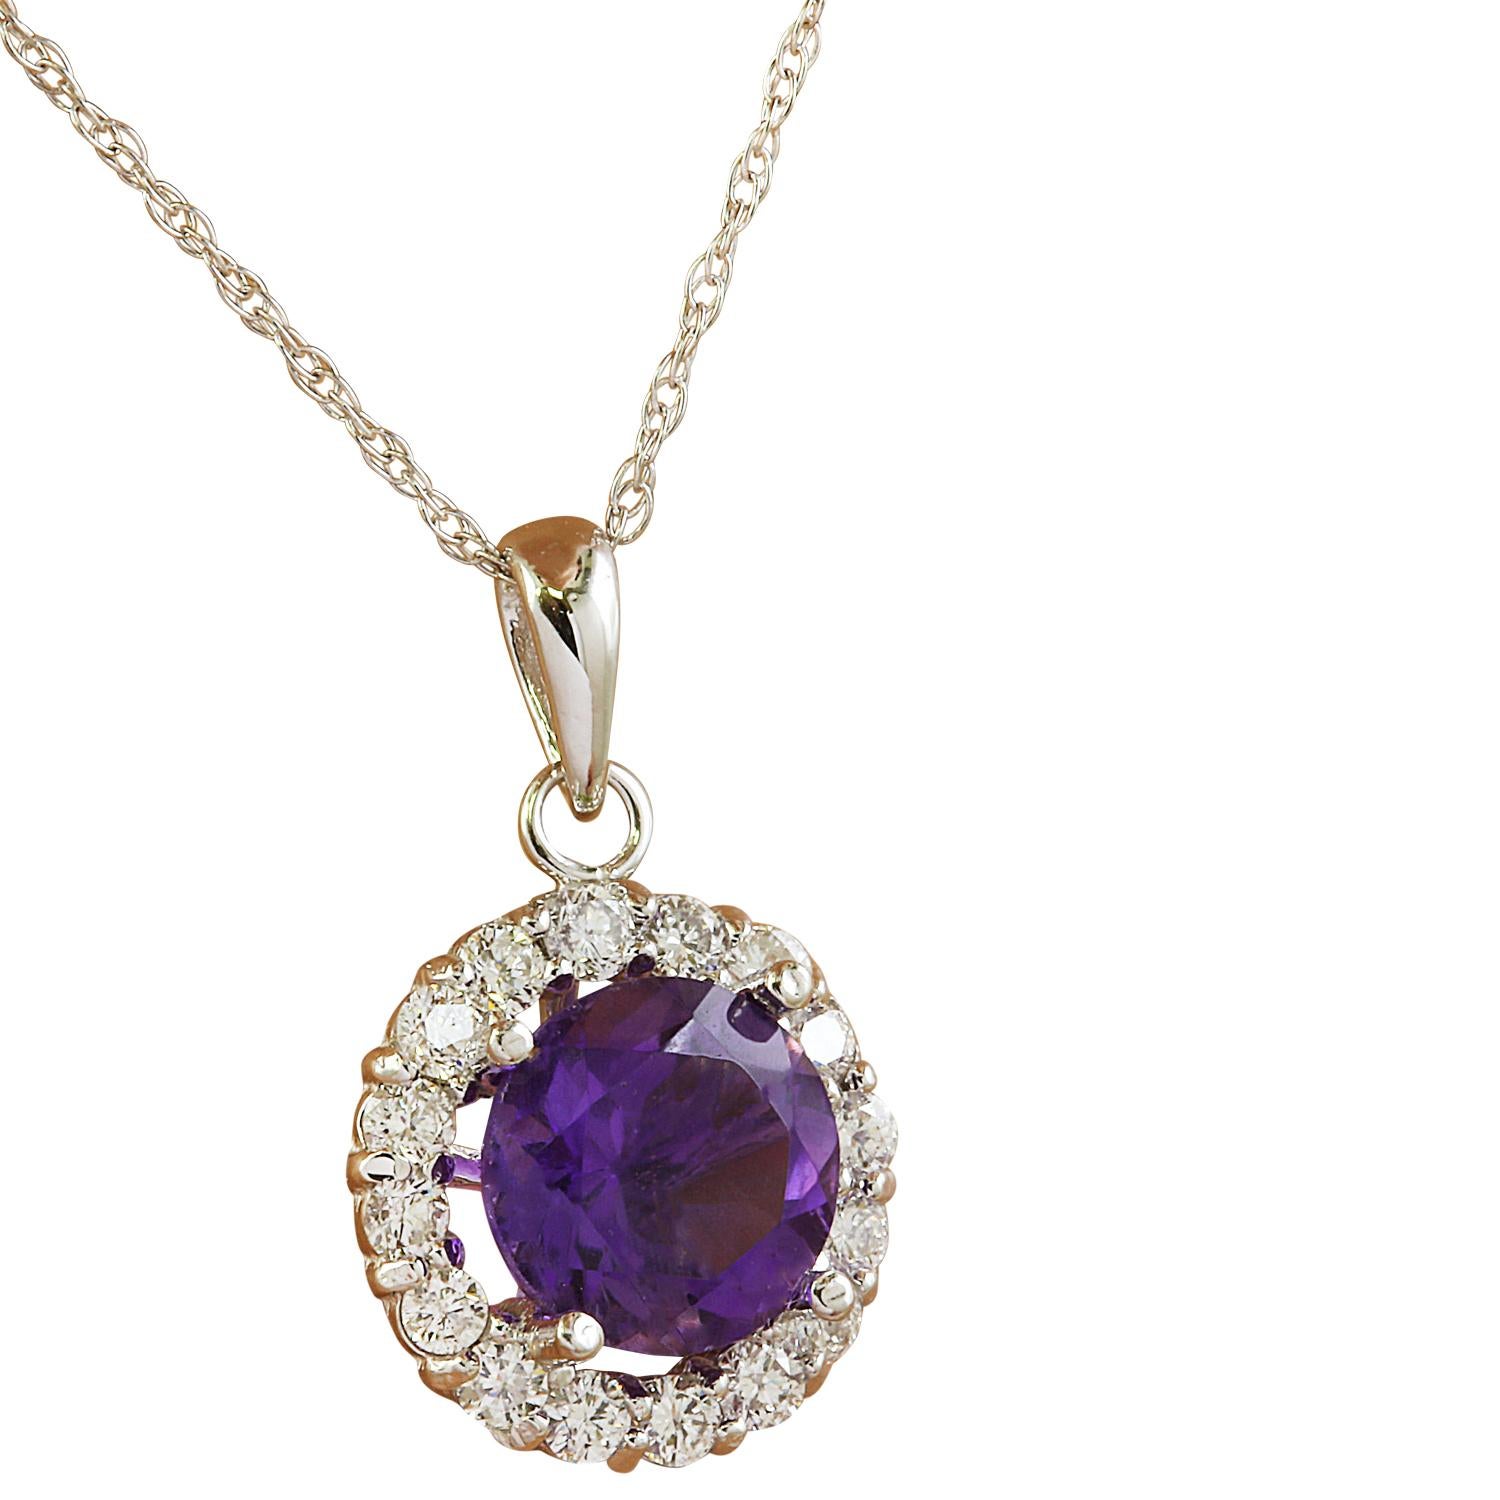 1.82 Carat Natural Amethyst 14 Karat Solid White Gold Diamond Necklace
Stamped: 14K
Total Necklace Weight: 0.90 Grams
Necklace Length 18 Inches
Amethyst Weight: 1.50 Carat (7.00x7.00 Millimeters)
Diamond Weight: 0.32 Carat (F-G Color, VS2-SI1